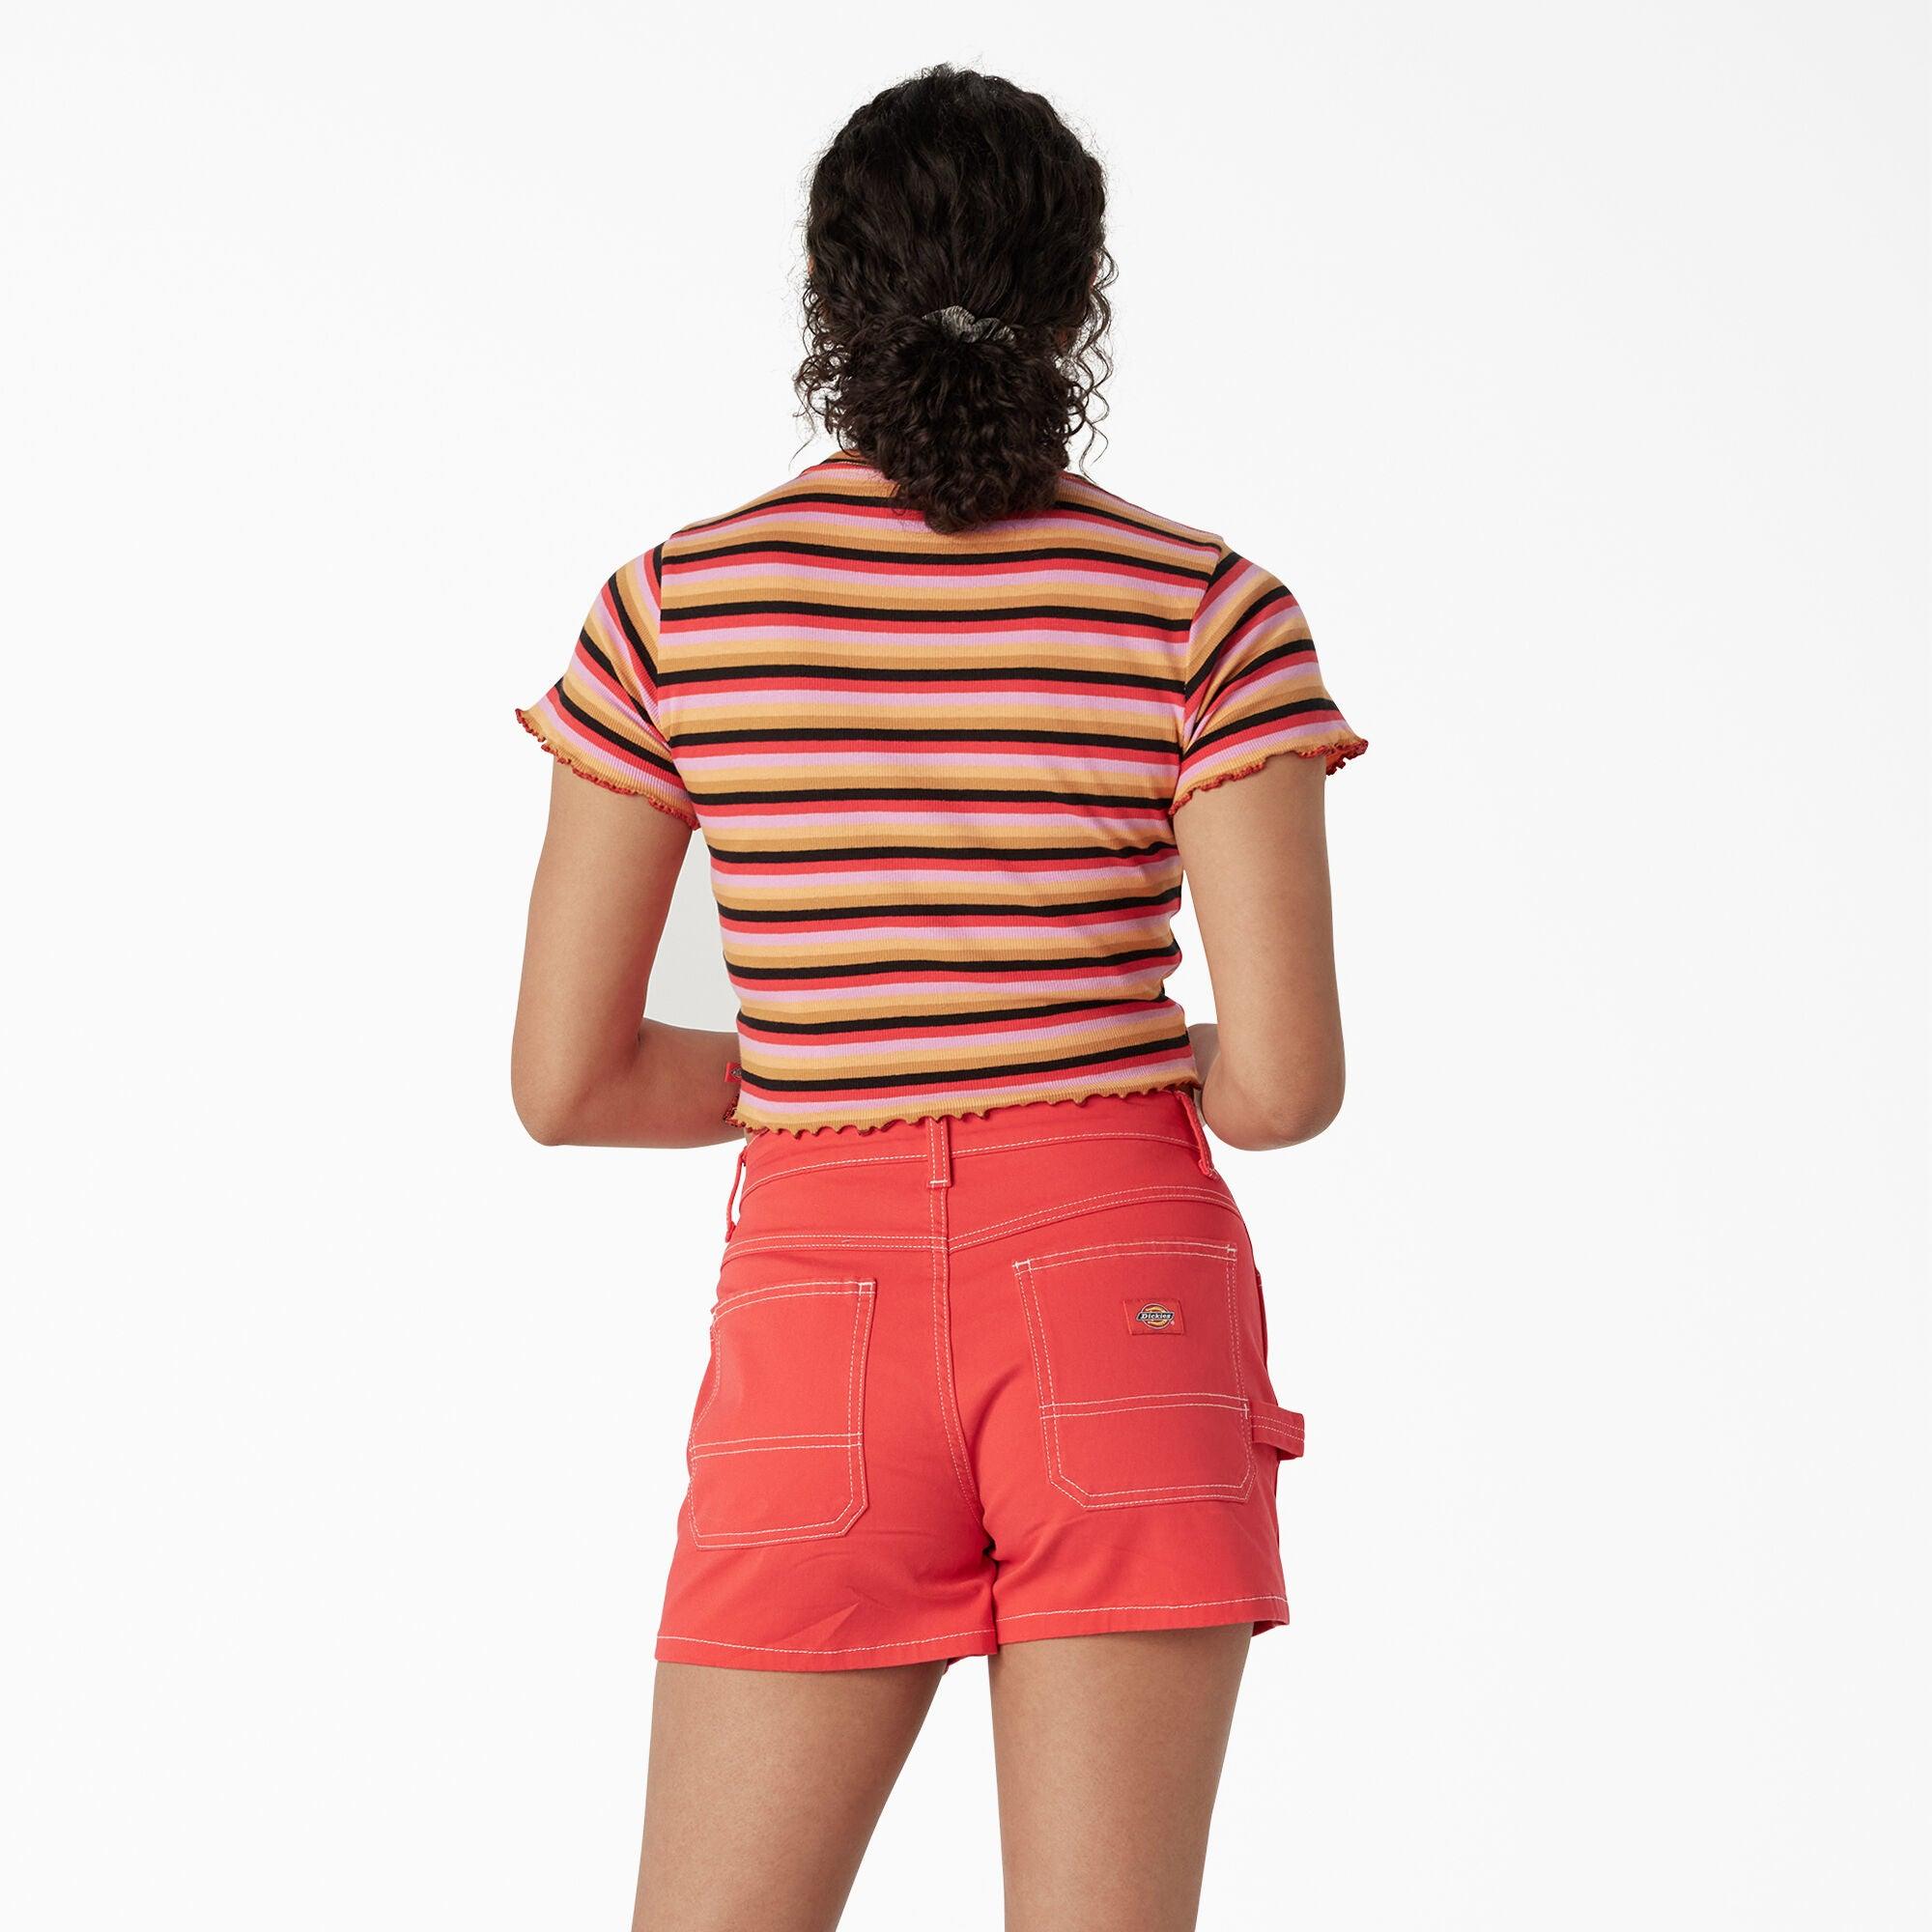 Women's Striped Cropped Baby T-Shirt, Orange Explorer Stripe - Purpose-Built / Home of the Trades